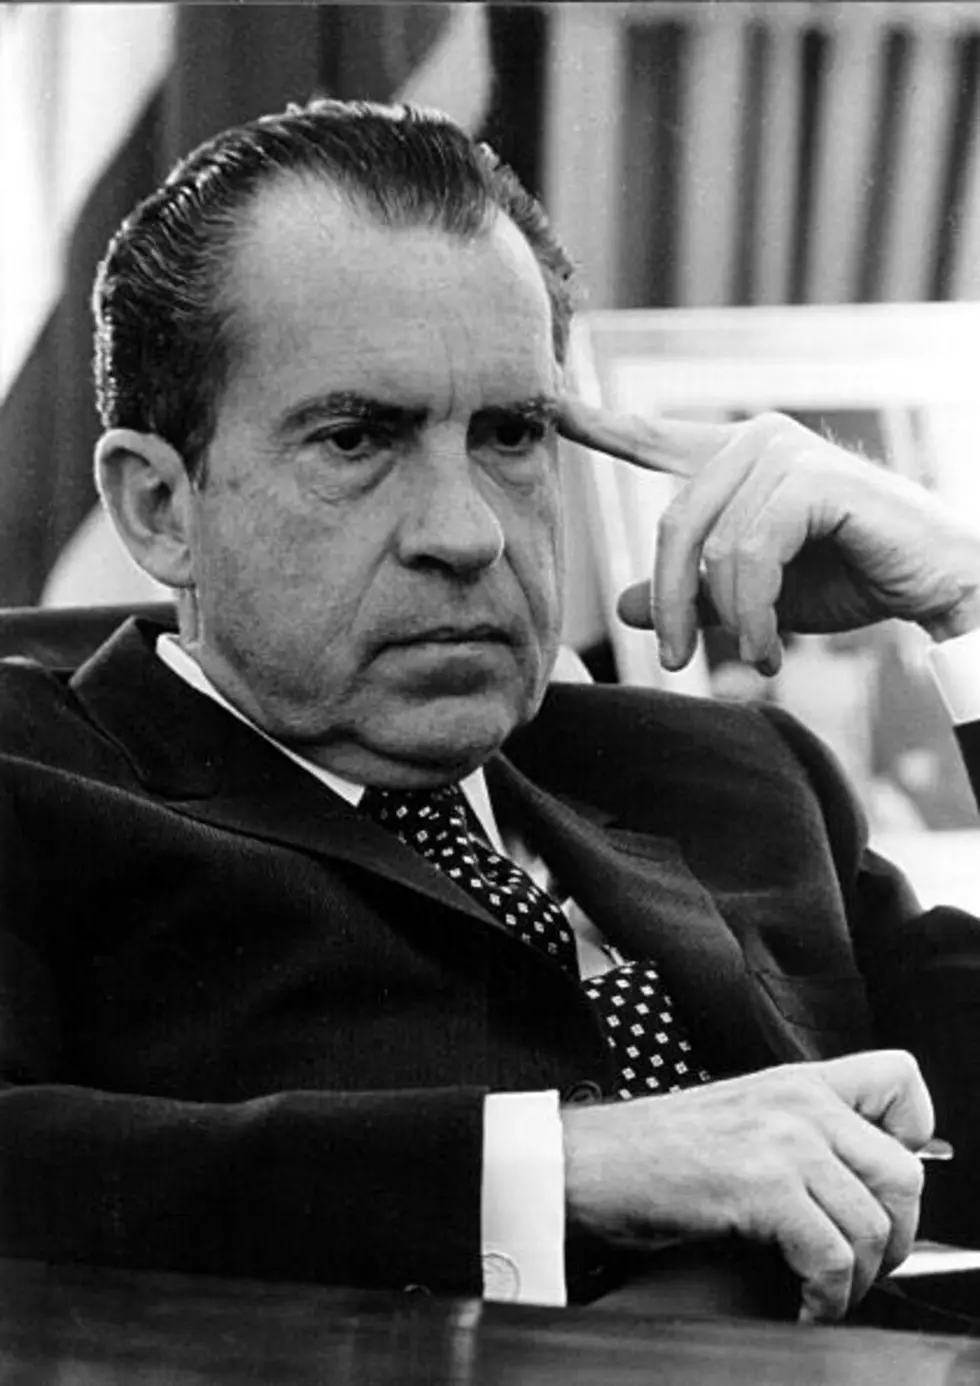 Nearly All “Nixon Tapes” Now Released – Reveals President As Watergate Loomed